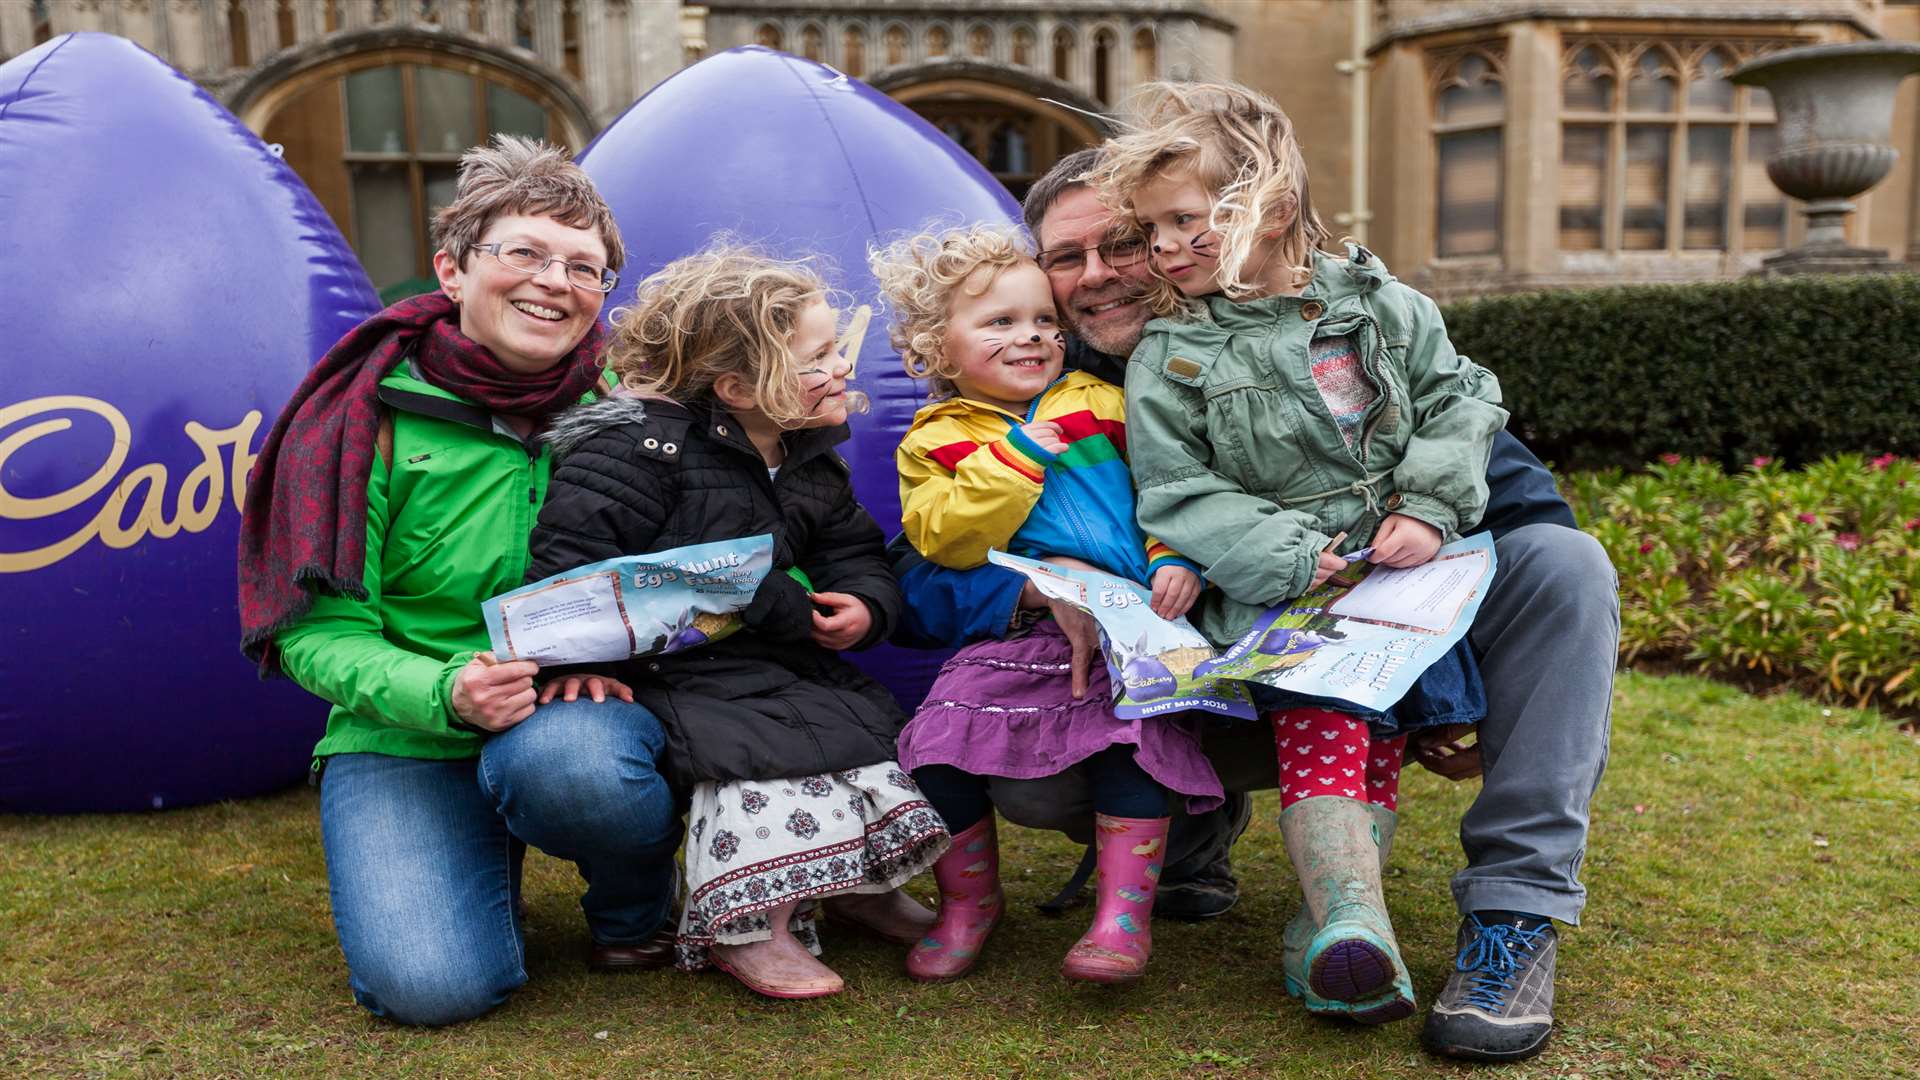 Some Cadbury Easter eggs will be hiding out at National Trust sites in Kent